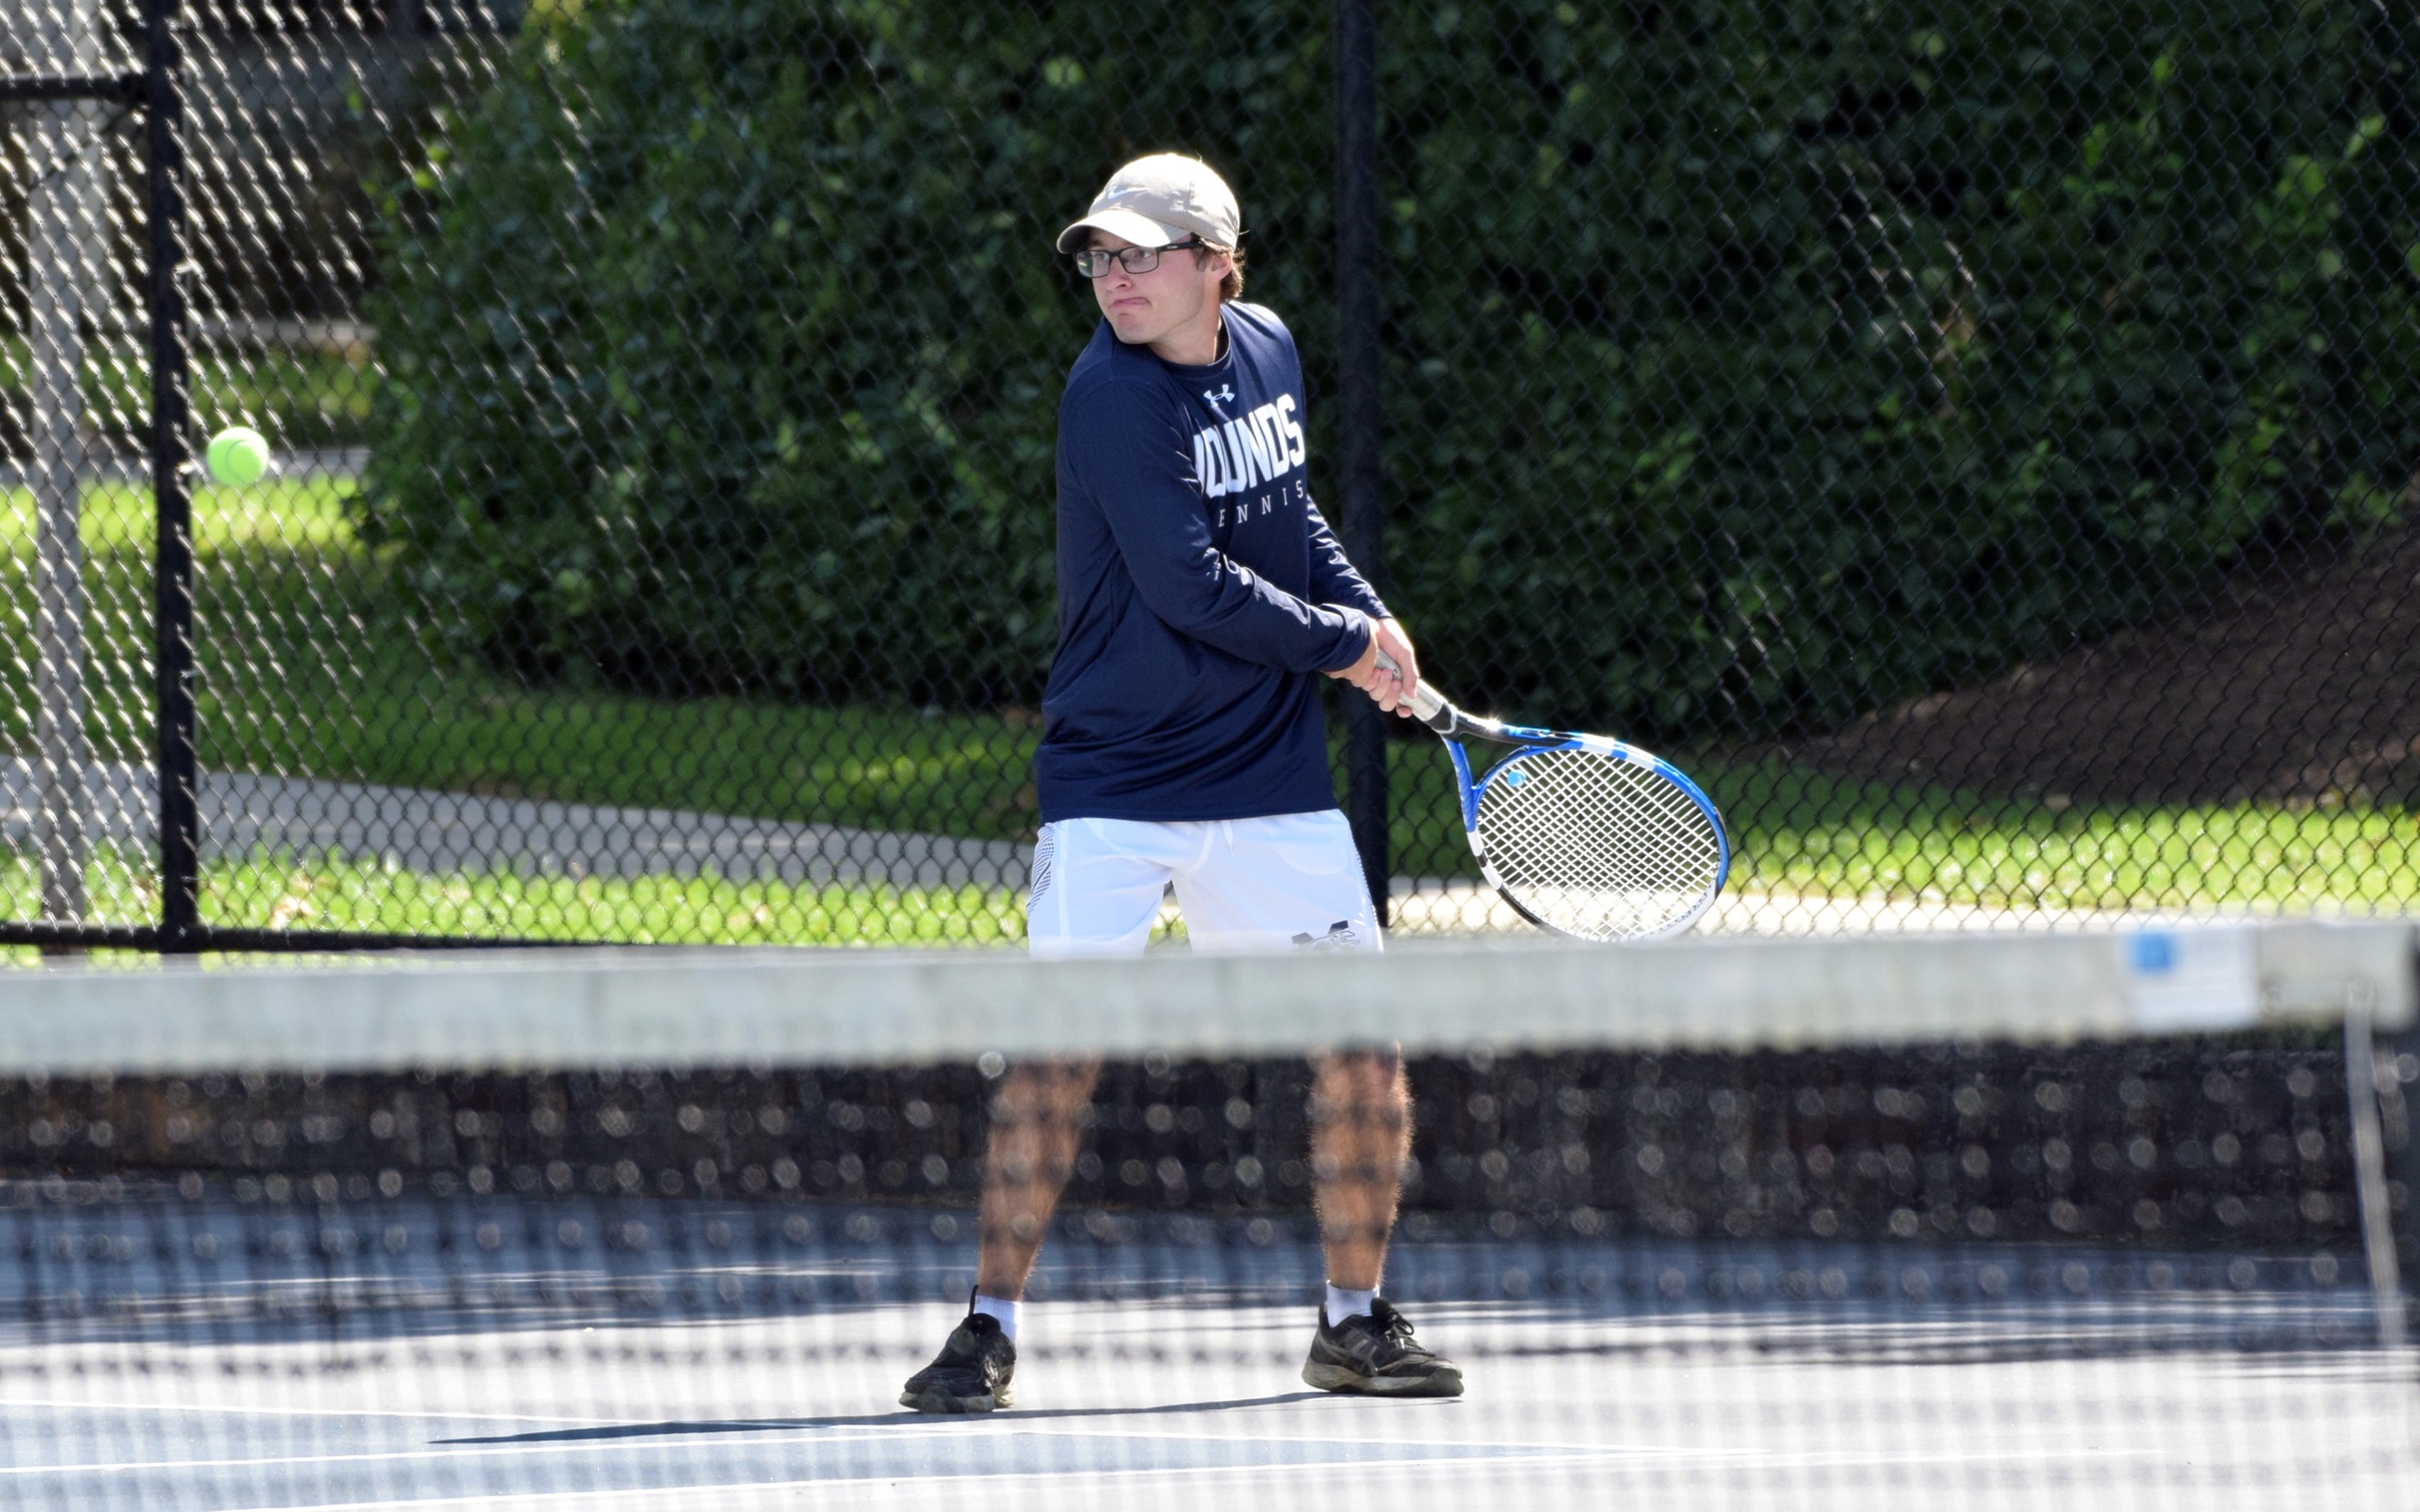 Junior Andrew Hozza returns a shot over the net at Hoffman Courts.